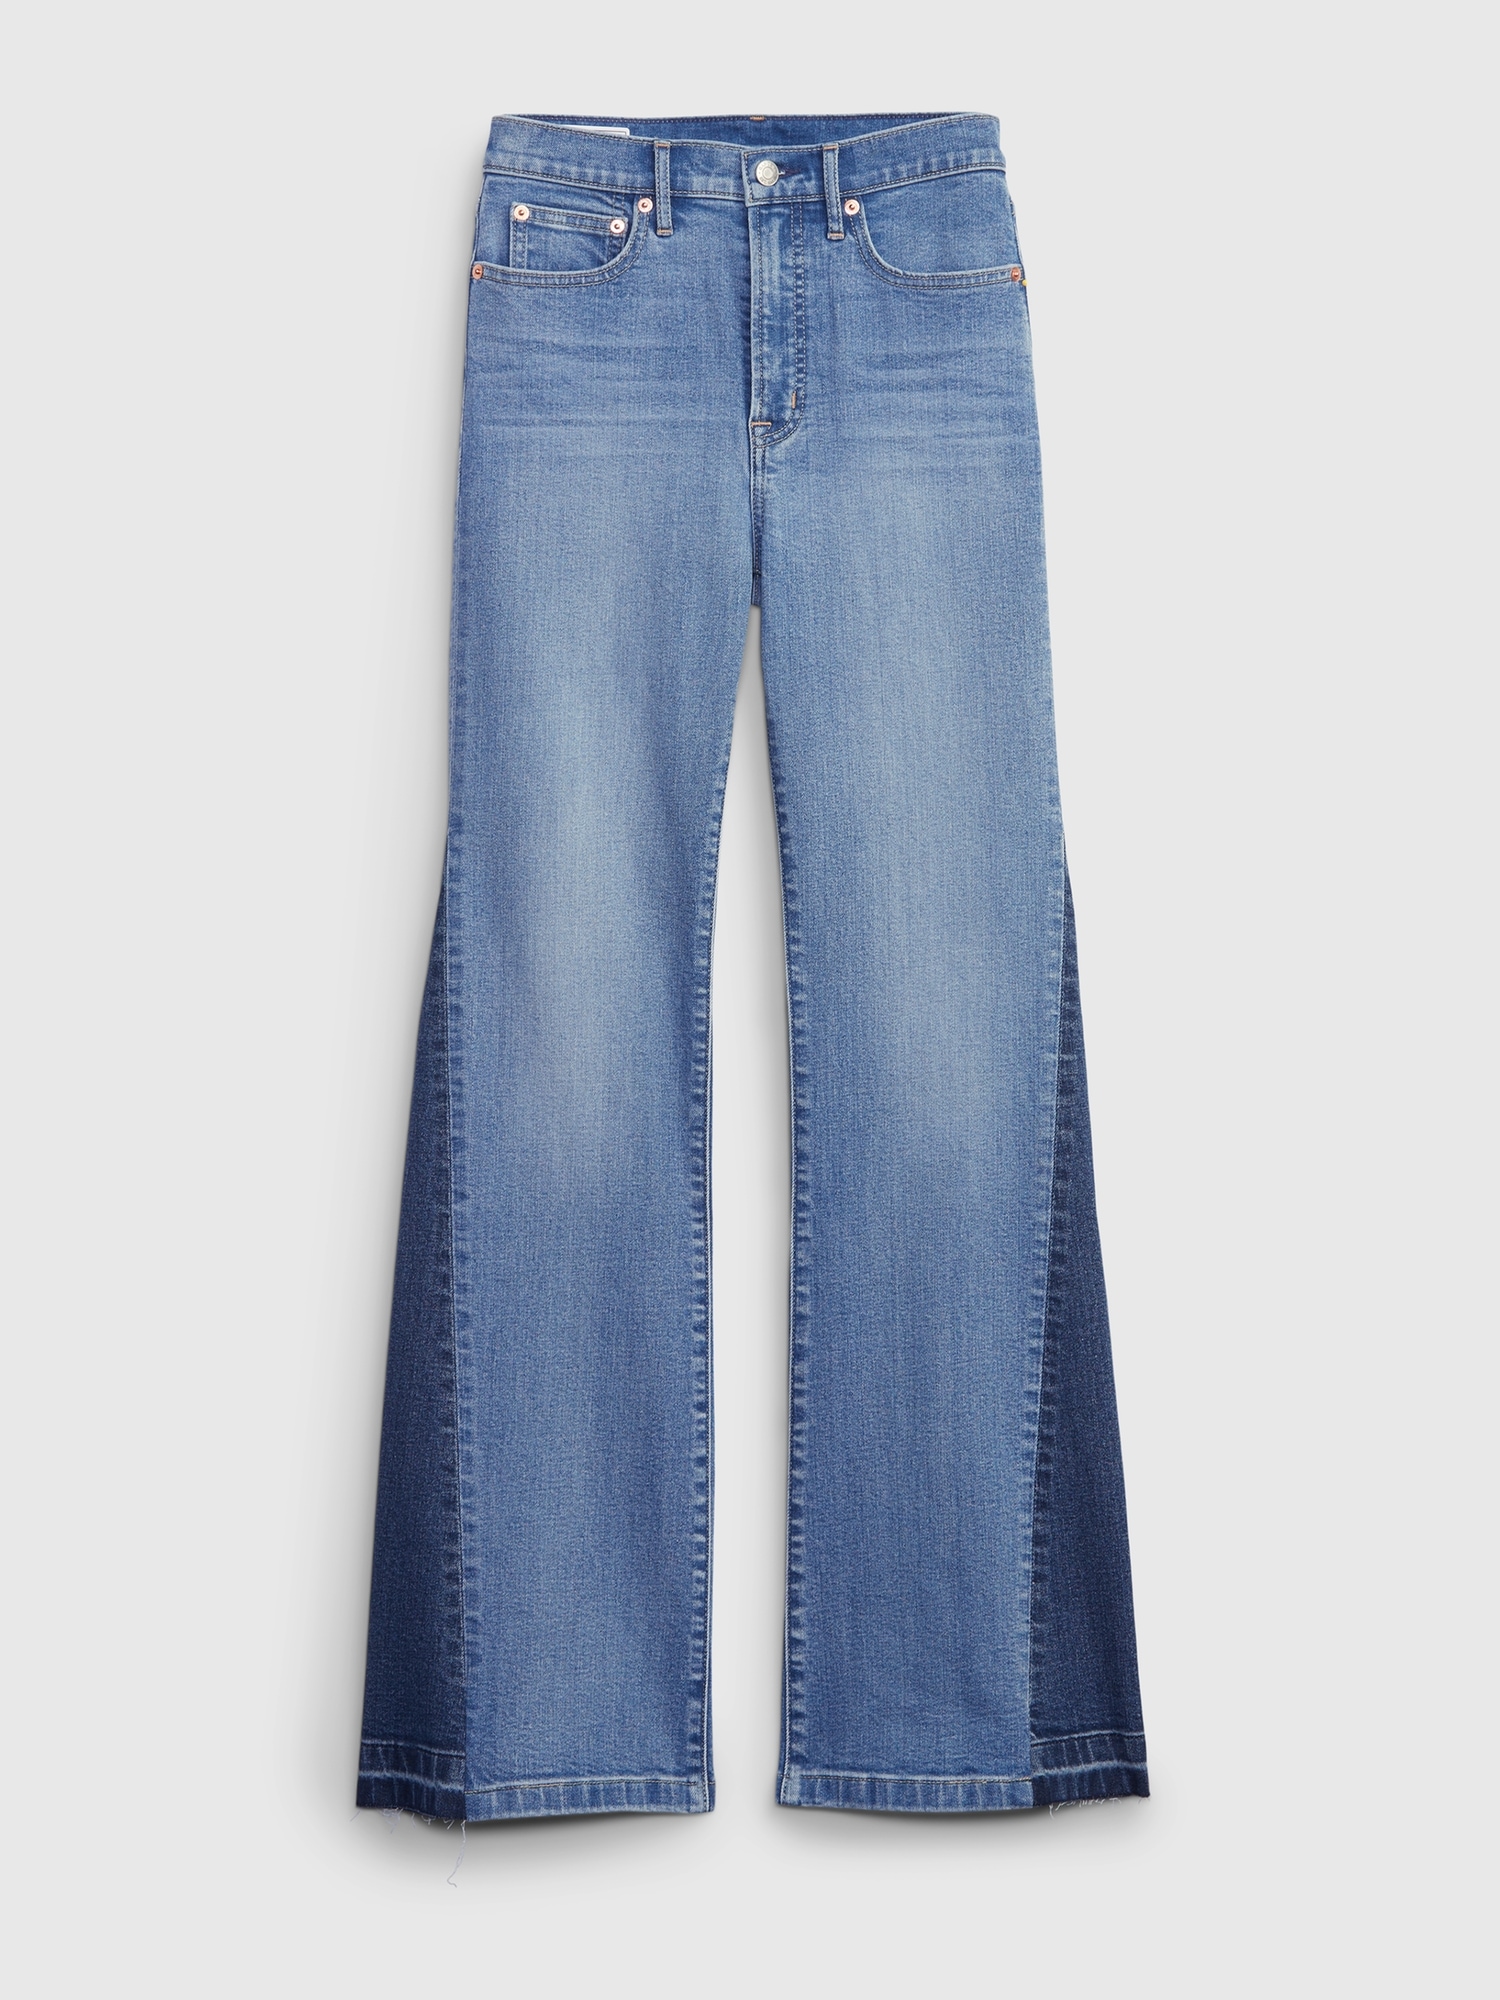 High Rise Gap Jeans | Flare \'70s